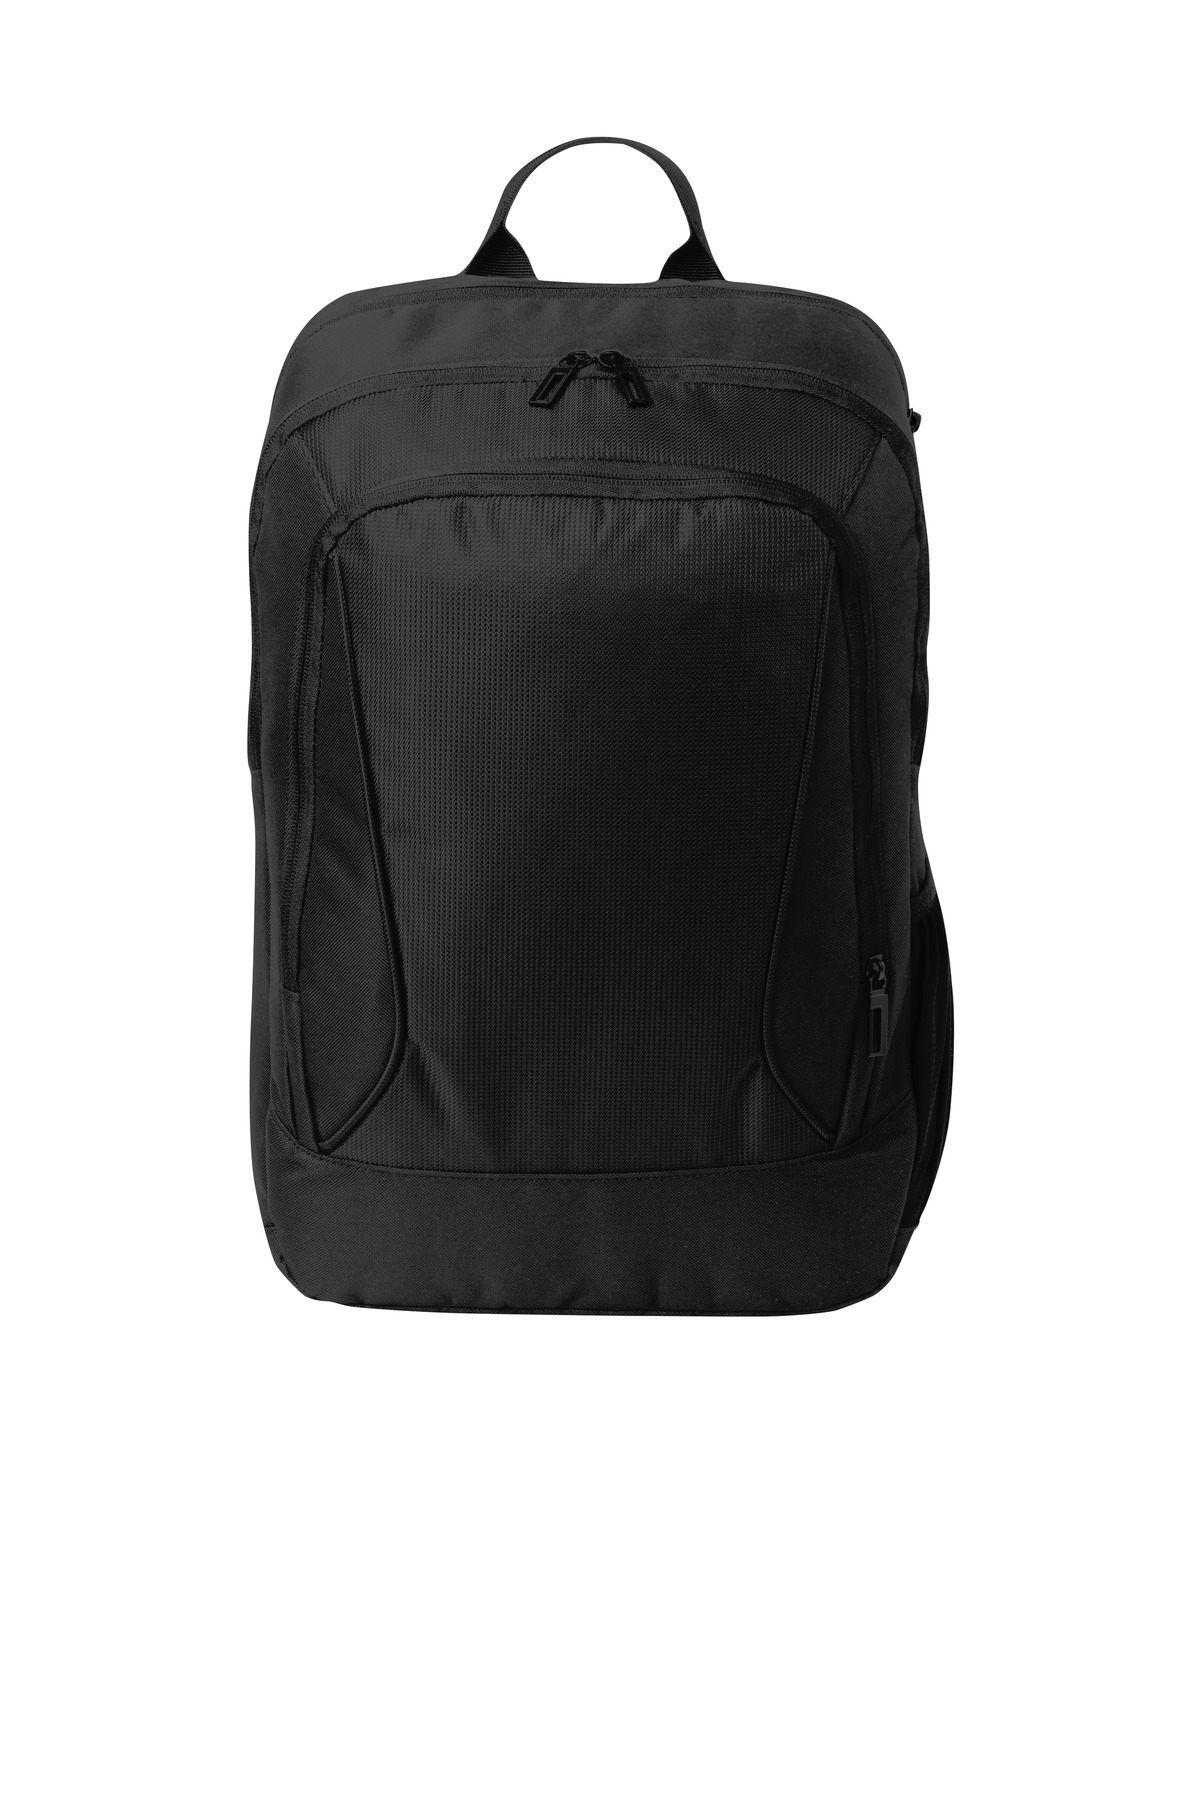 Port Authority City Backpack-Port Authority